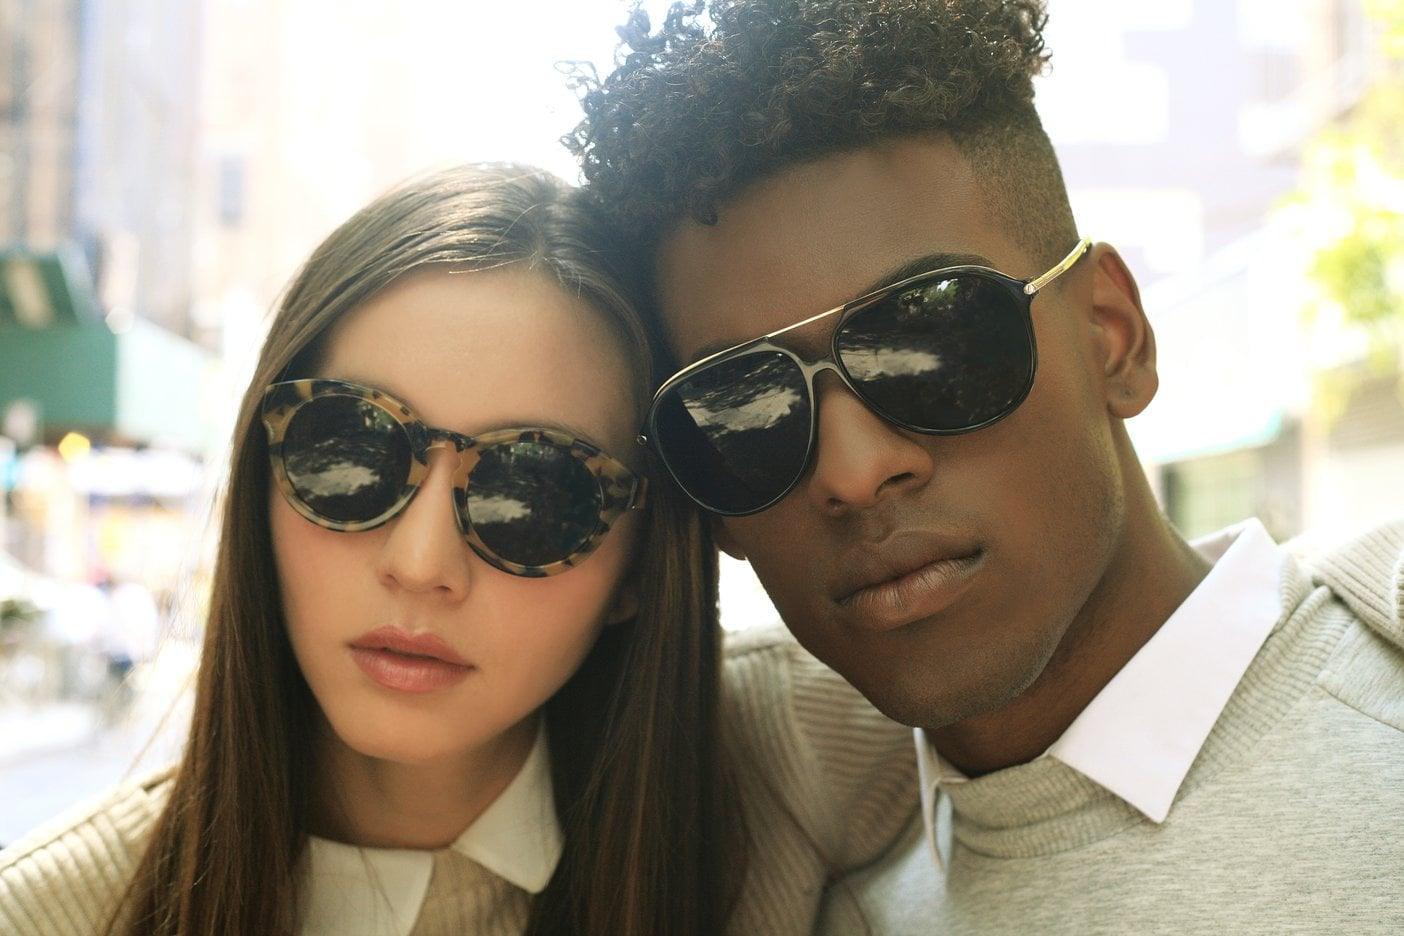 This Spring, tap the retro mood wearing sunglasses chains